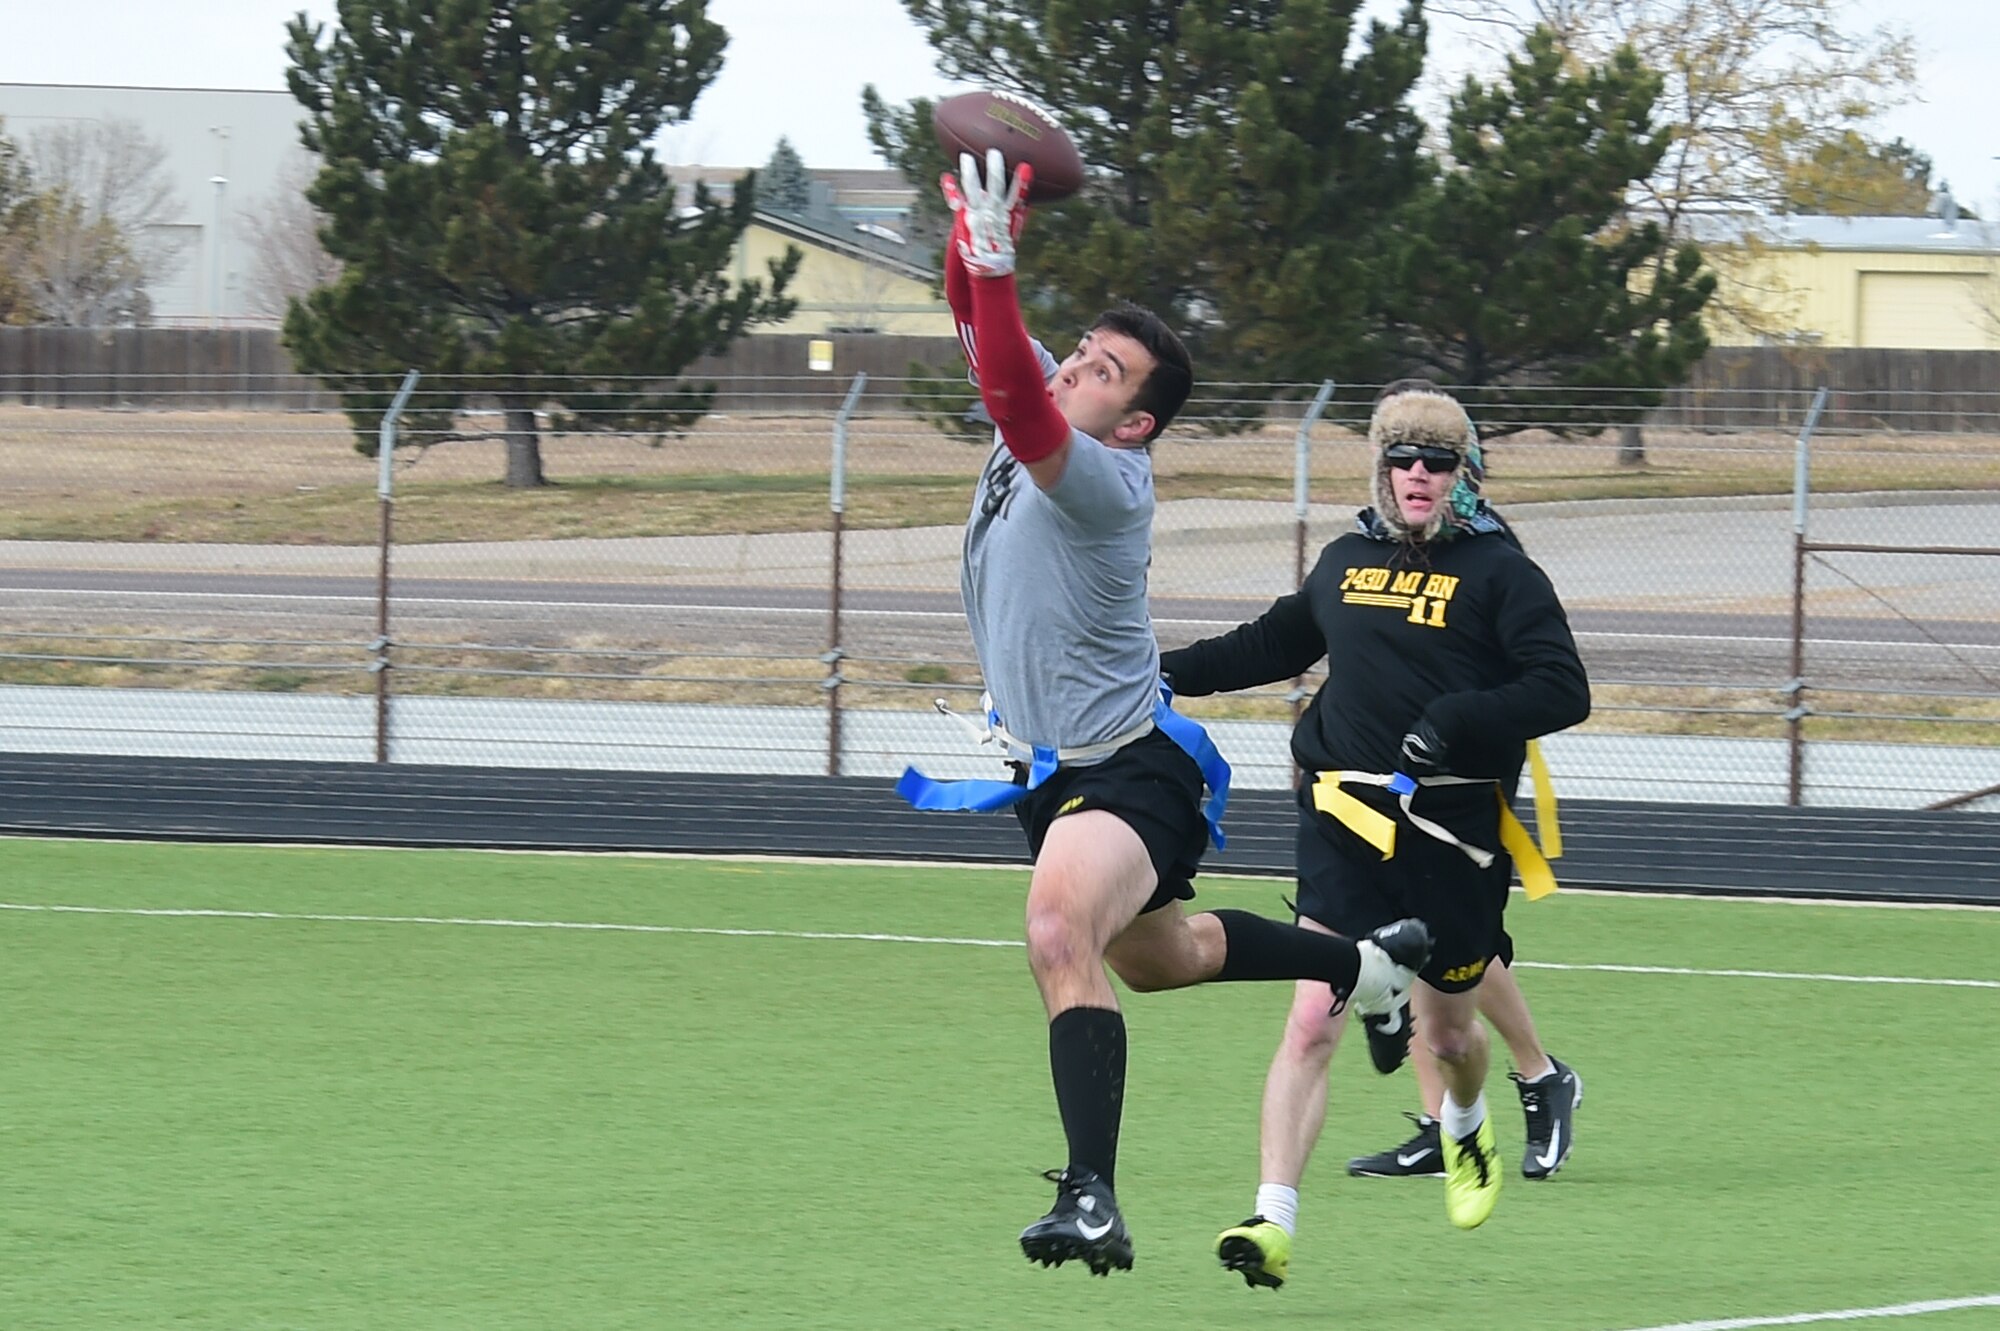 A member of the 743rd Military Intelligence Battalion Senior NCOs team leaps to make a catch Nov. 25, 2015, on Buckley Air Force Base, Colo. The final outcome of the annual 743rd MI Battalion Turkey Bowl game was 24 to 18 with the officers walking away with the victory. (U.S. Air Force photo by Airman 1st Class Luke W. Nowakowski/Released) 